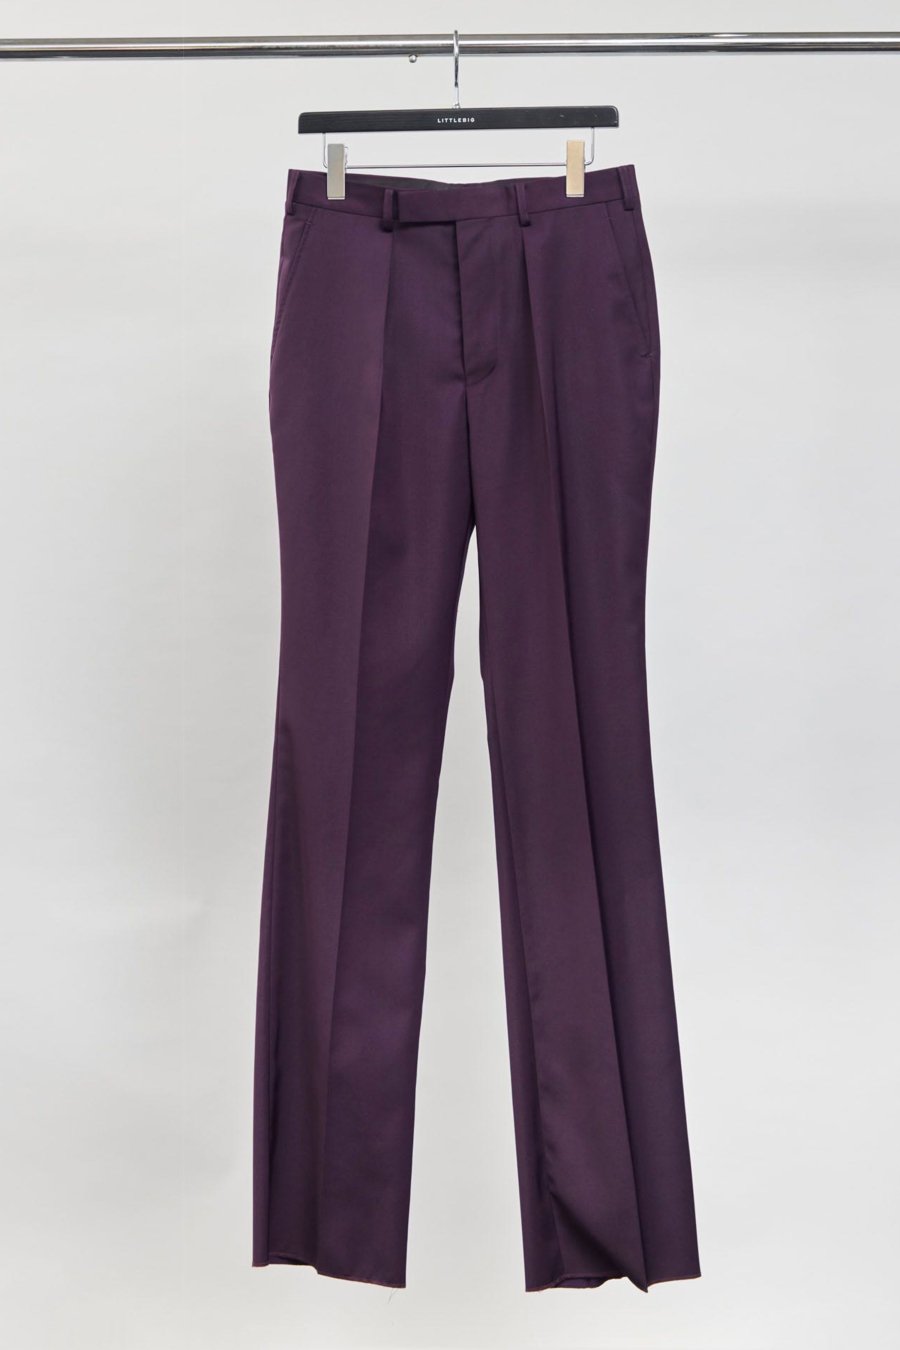 LITTLEBIG  Purple Trousers<img class='new_mark_img2' src='https://img.shop-pro.jp/img/new/icons15.gif' style='border:none;display:inline;margin:0px;padding:0px;width:auto;' />